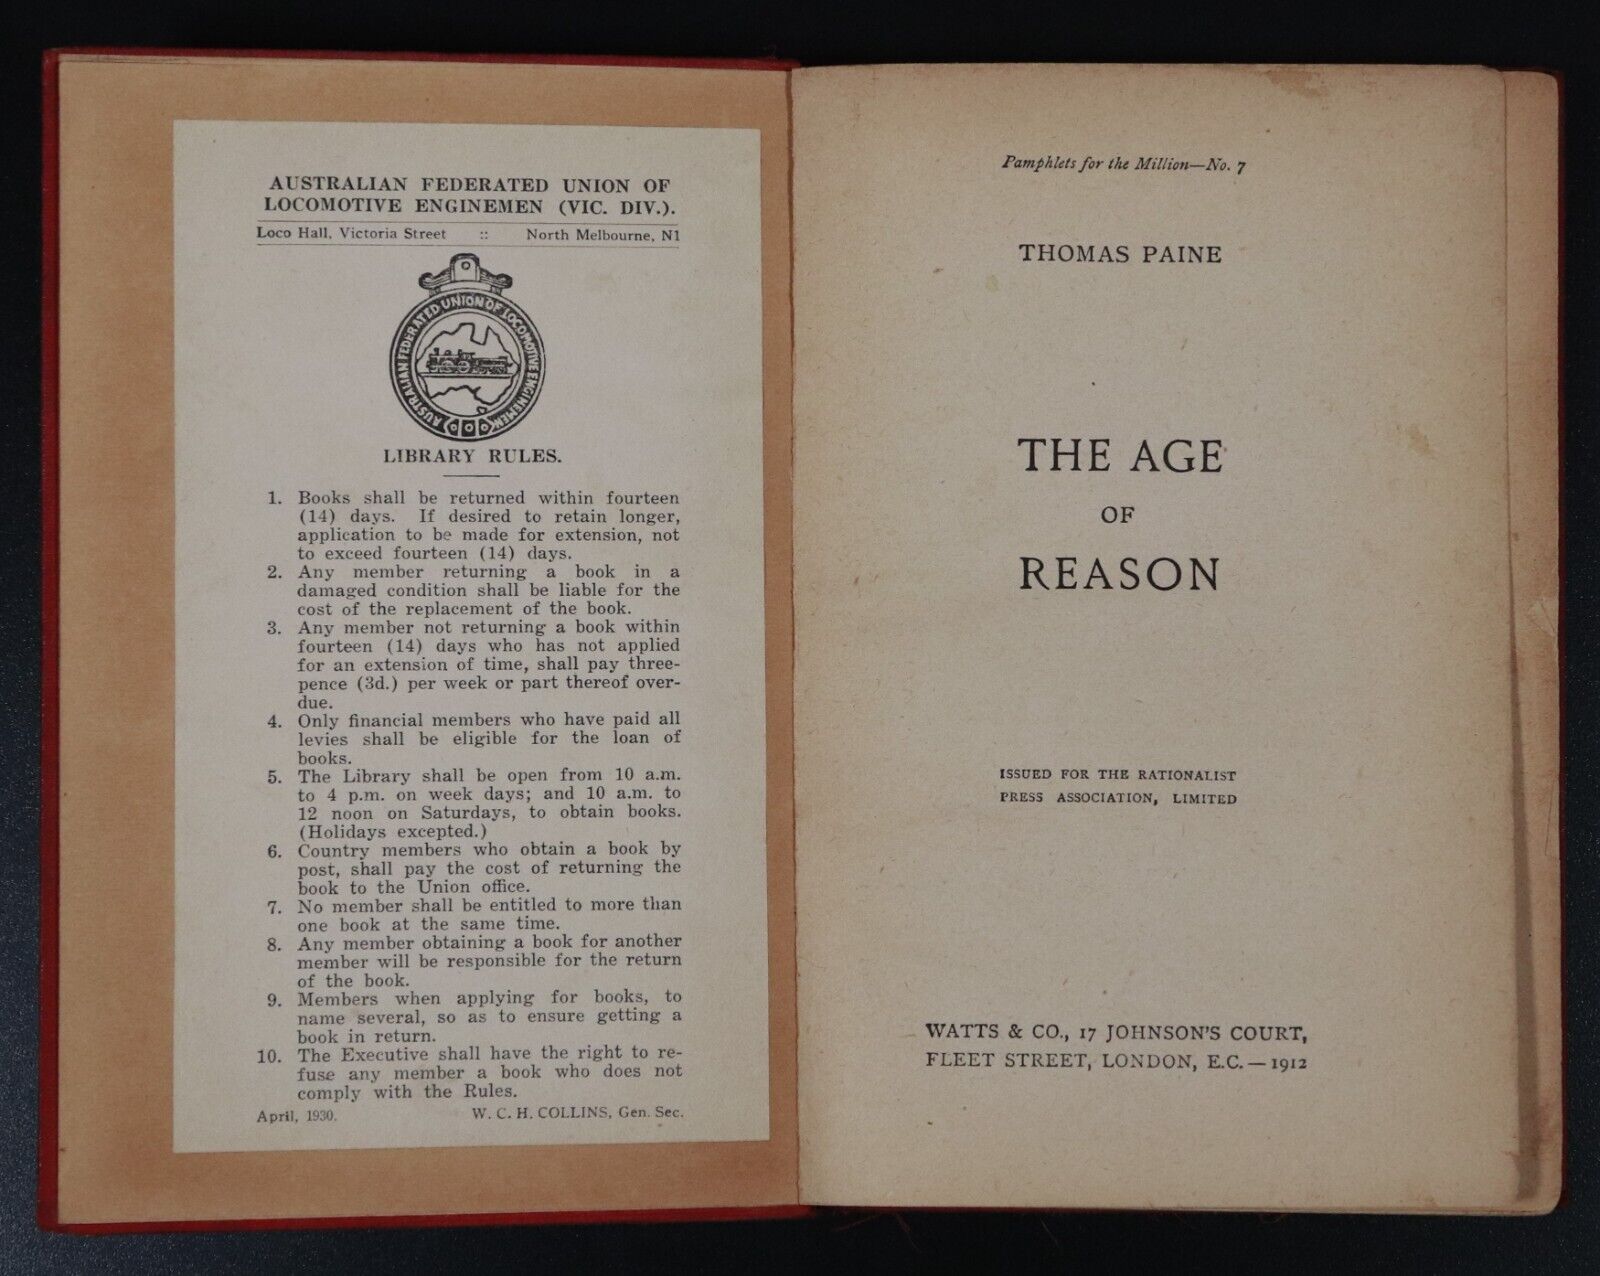 1912 The Age Of Reason by Thomas Paine Antique Rationalist Press Assoc. Book - 0